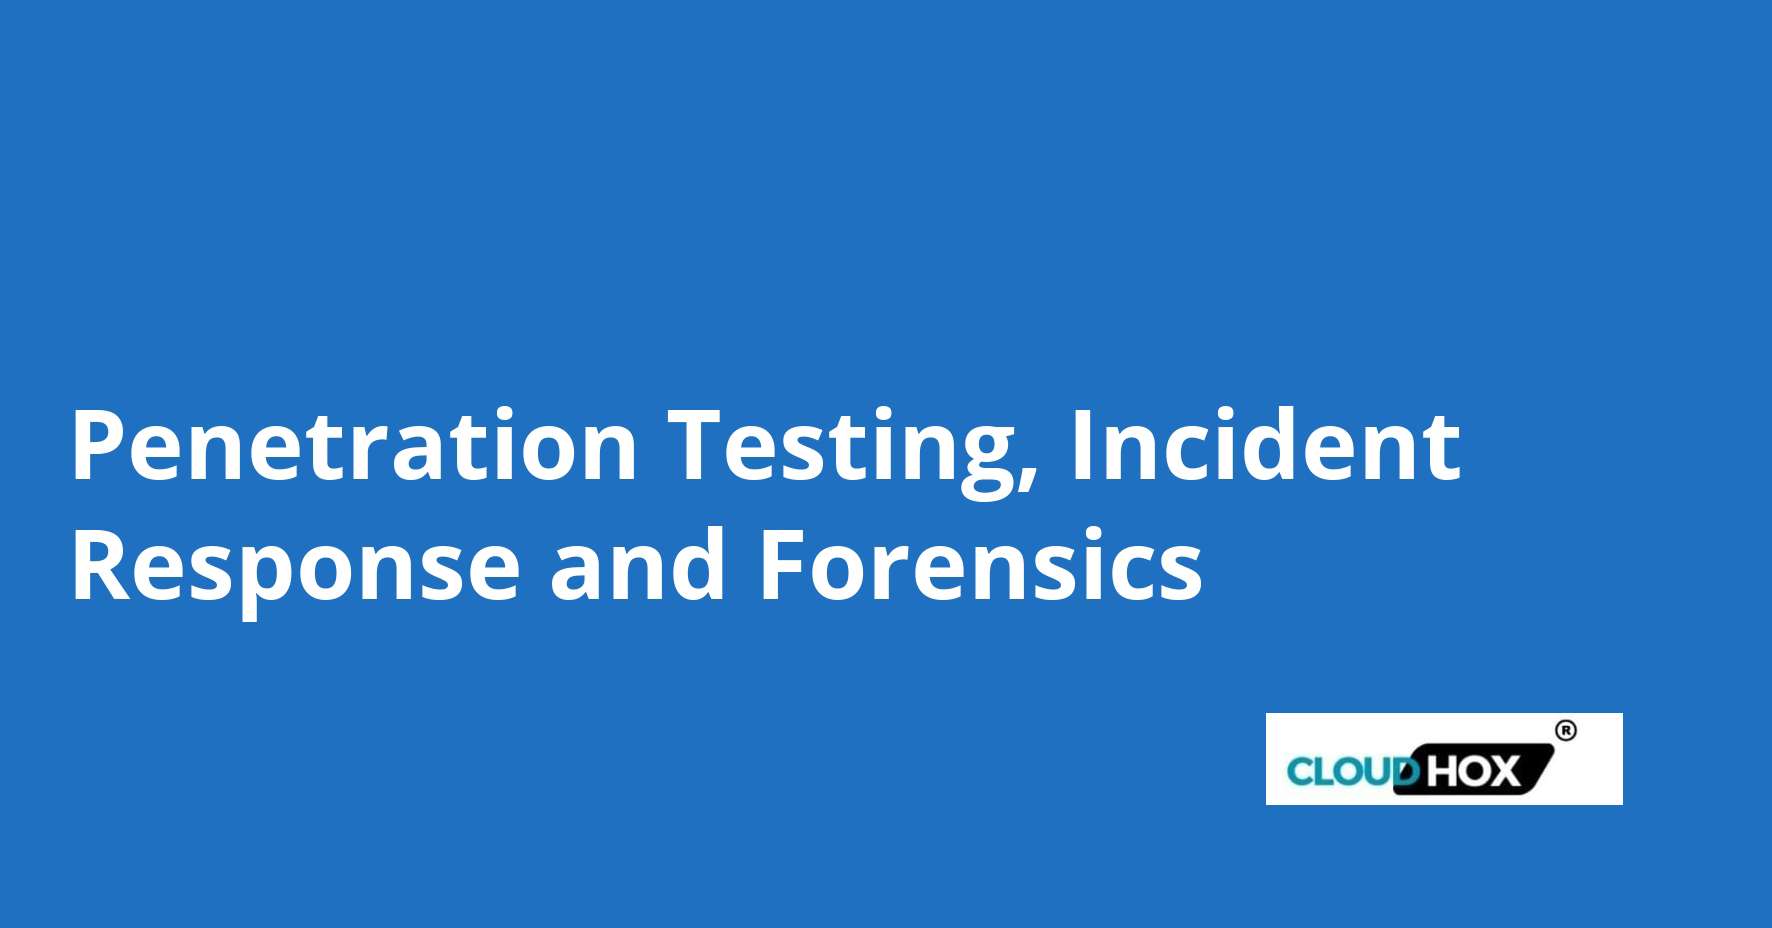 Penetration Testing, Incident Response and Forensics